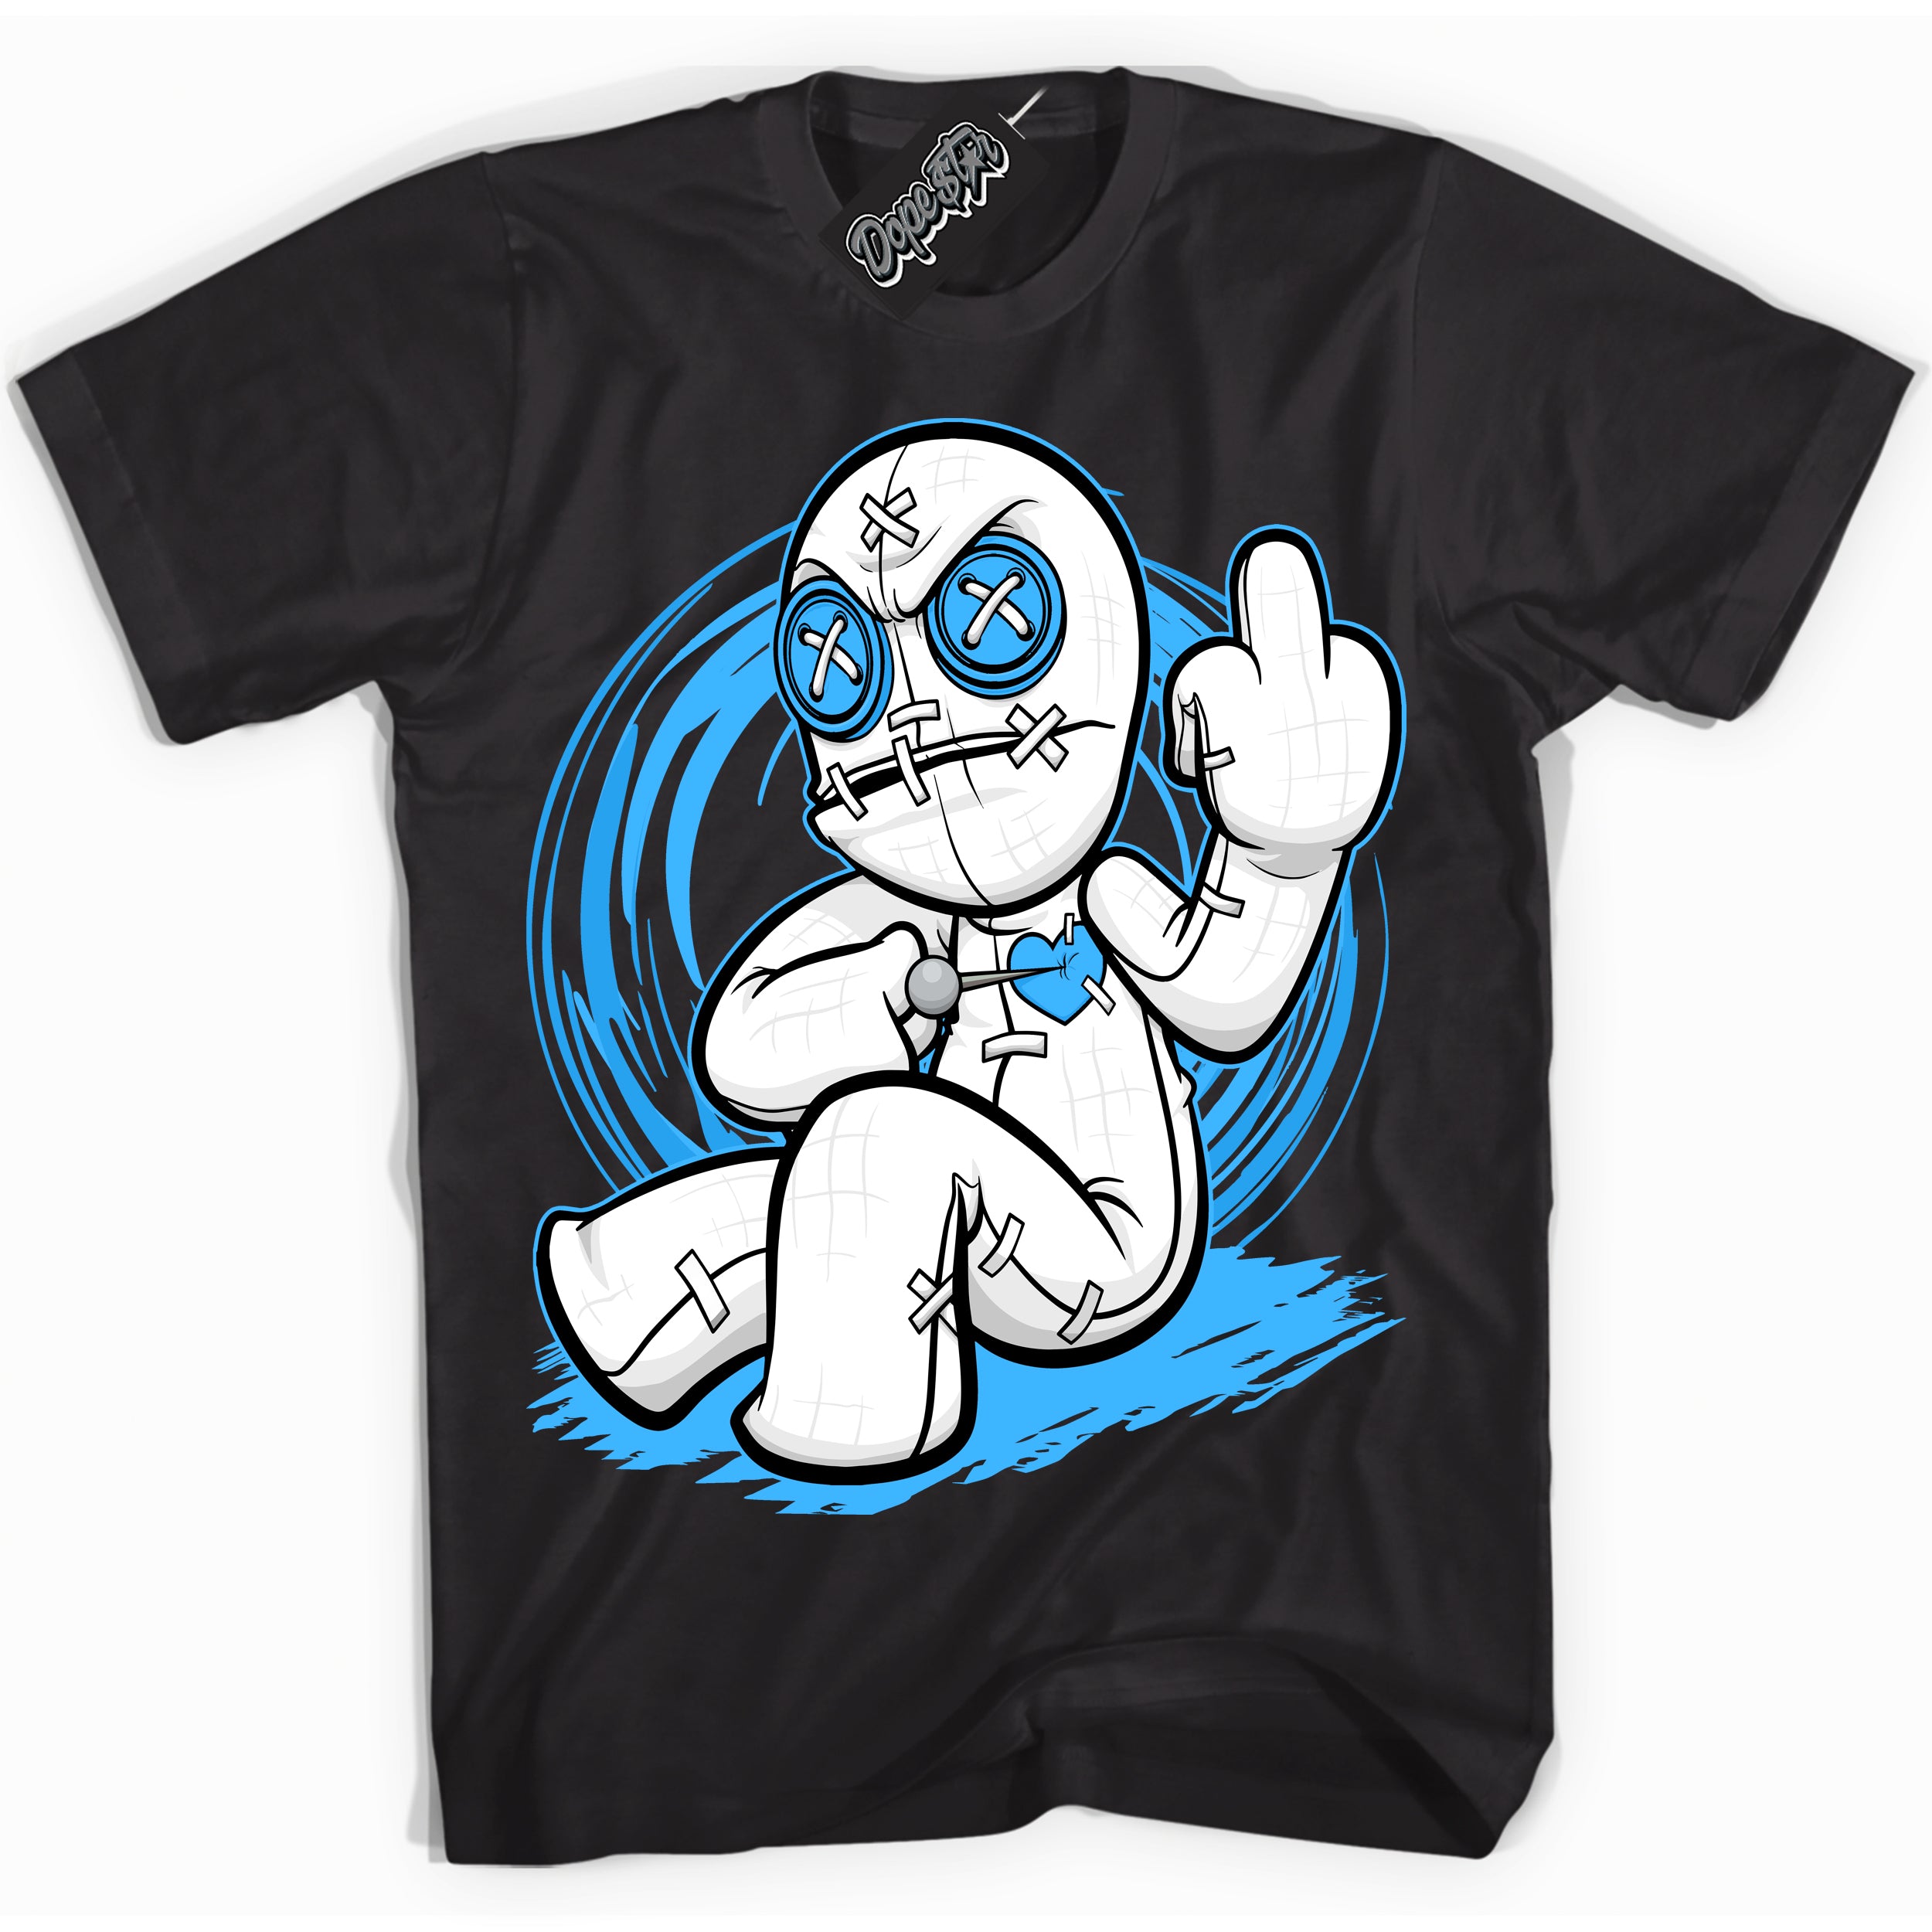 Cool Black graphic tee with “ VooDoo Doll ” design, that perfectly matches Powder Blue 9s sneakers 